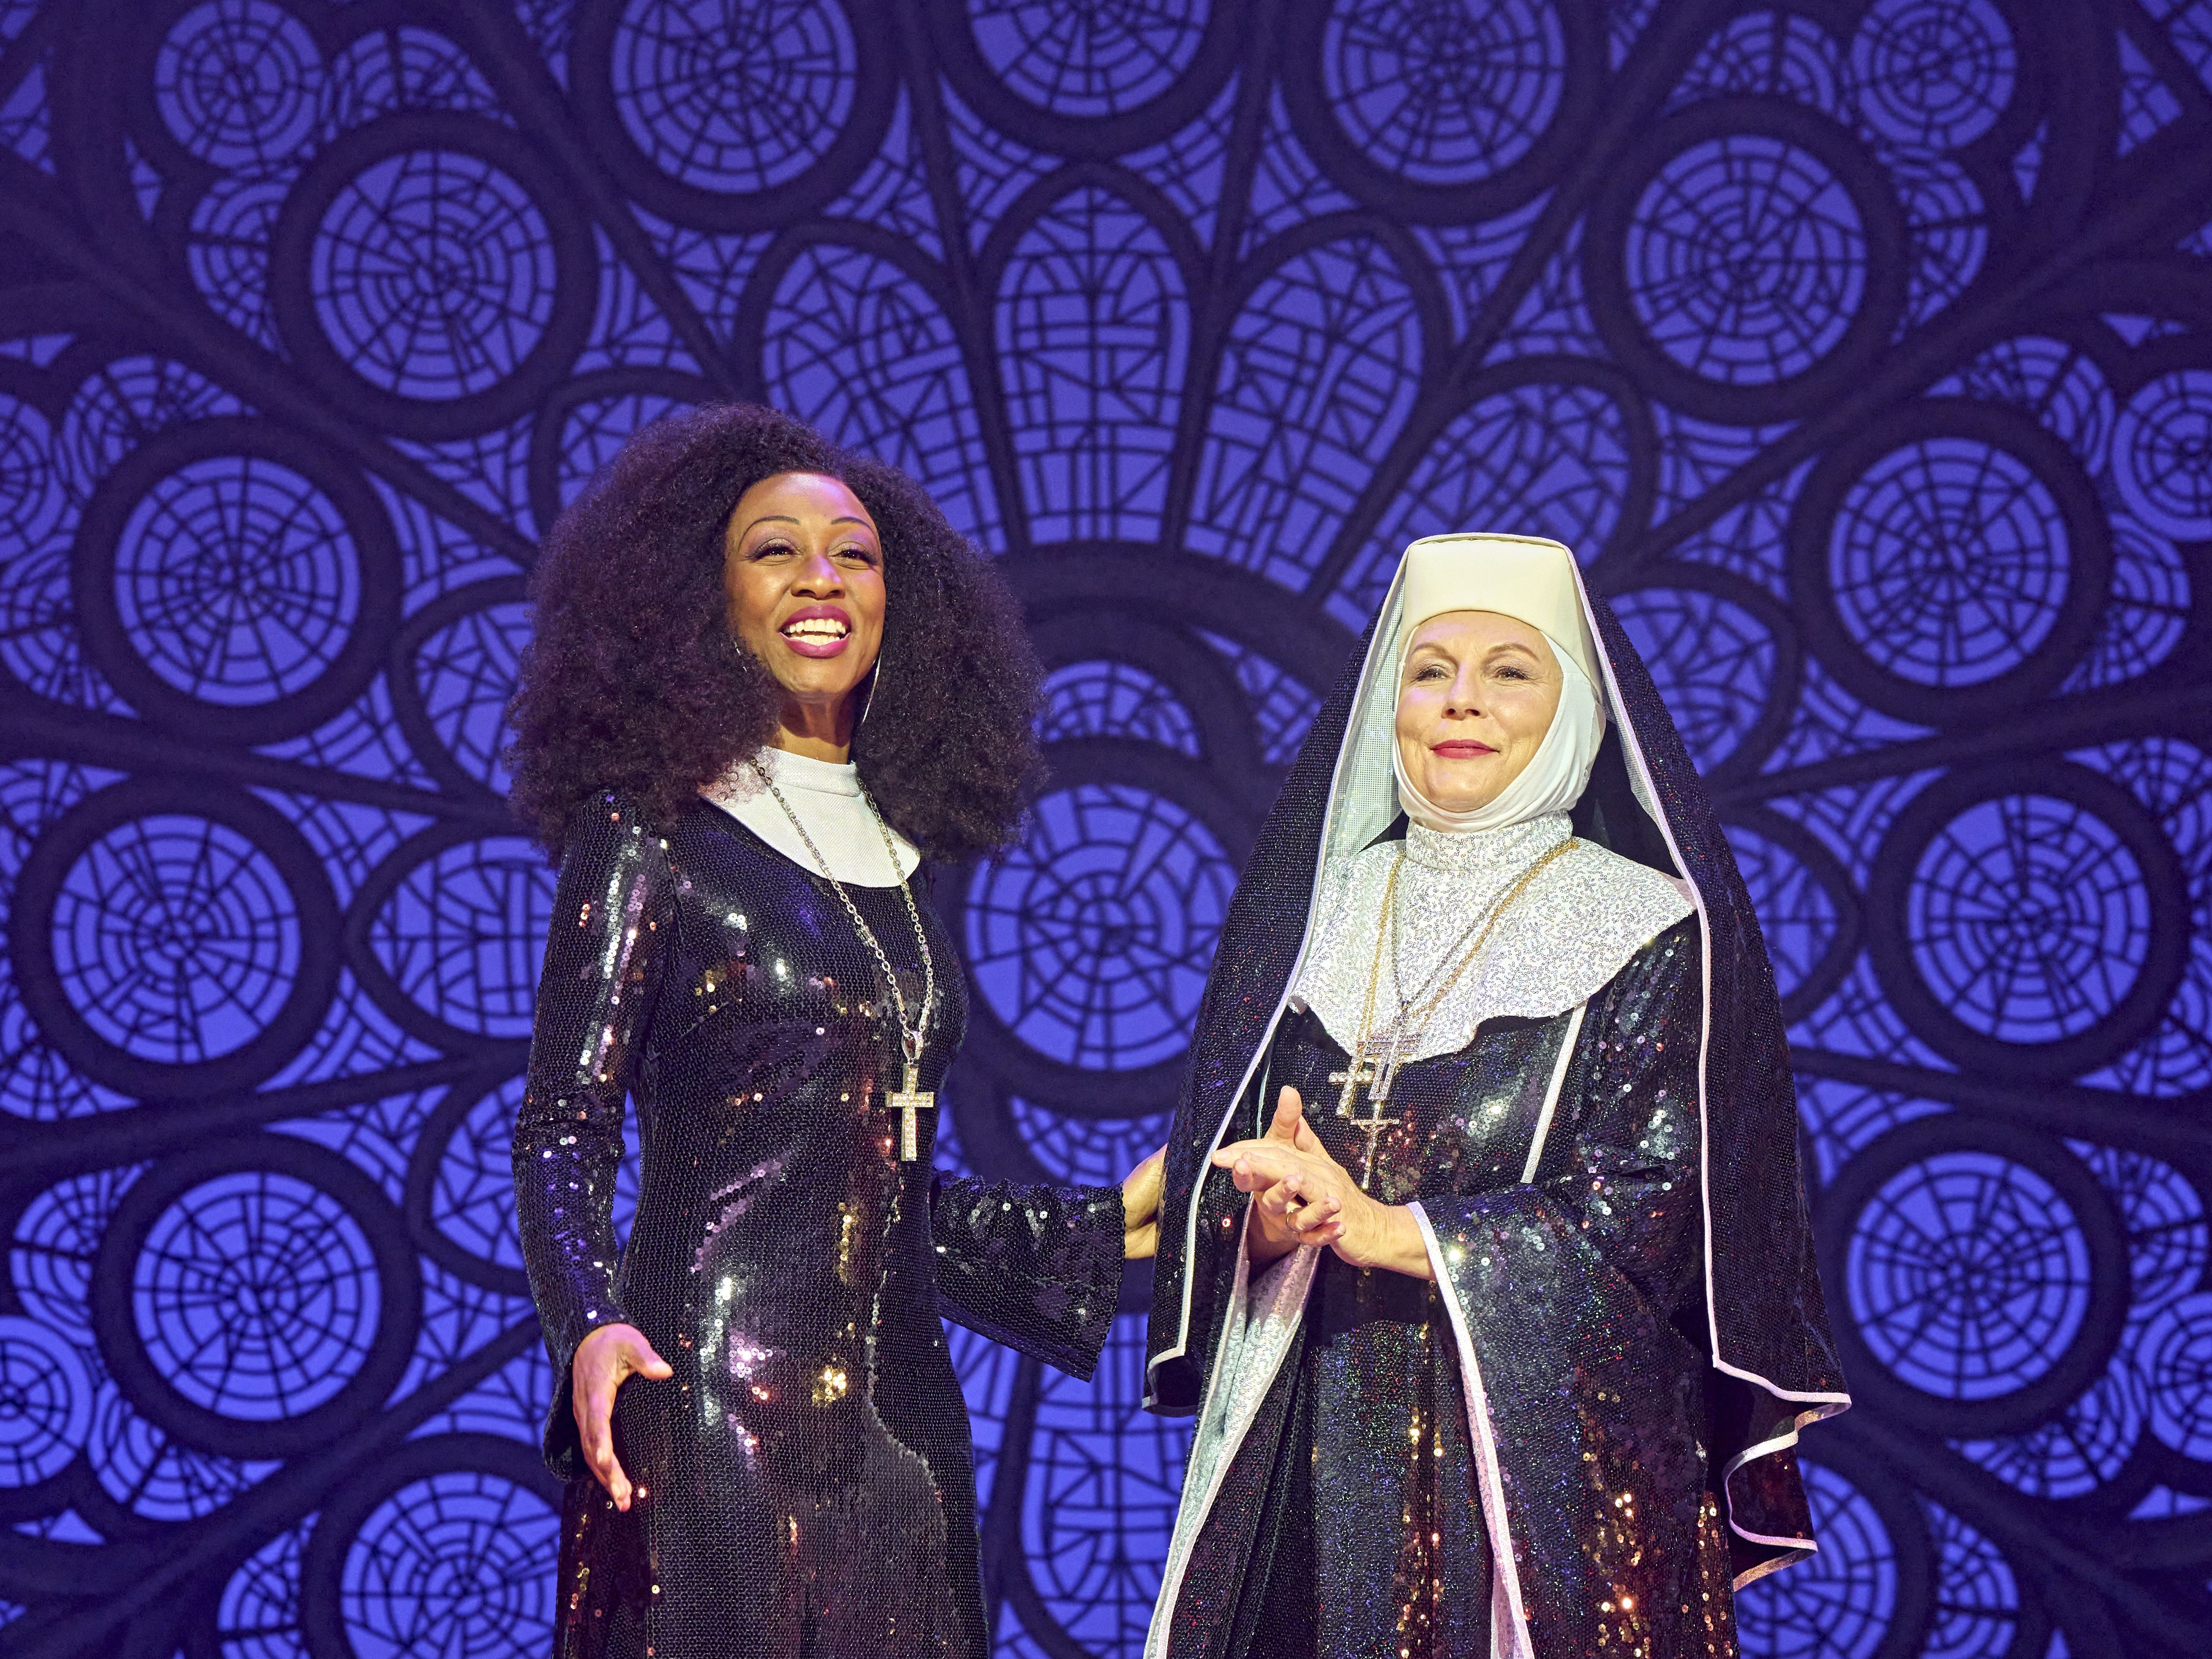 Beverley Knight as ‘Deloris van Cartier’ and Jennifer Saunders as ‘Mother Superior’ in Sister Act